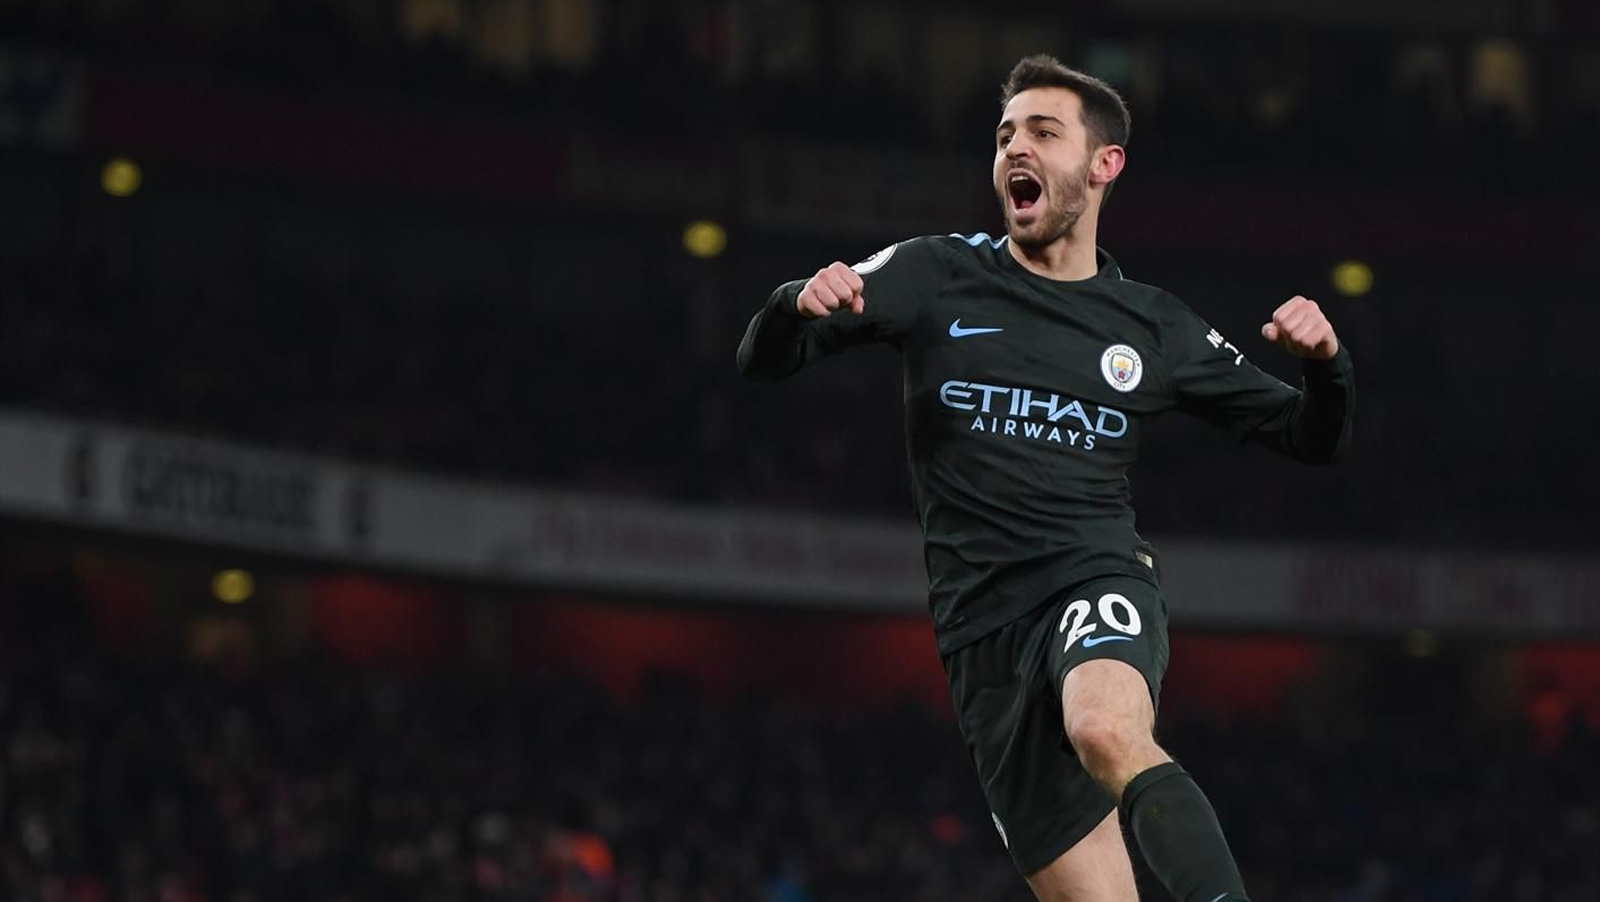 EPL Review Week 28: City slam another three past Arsenal